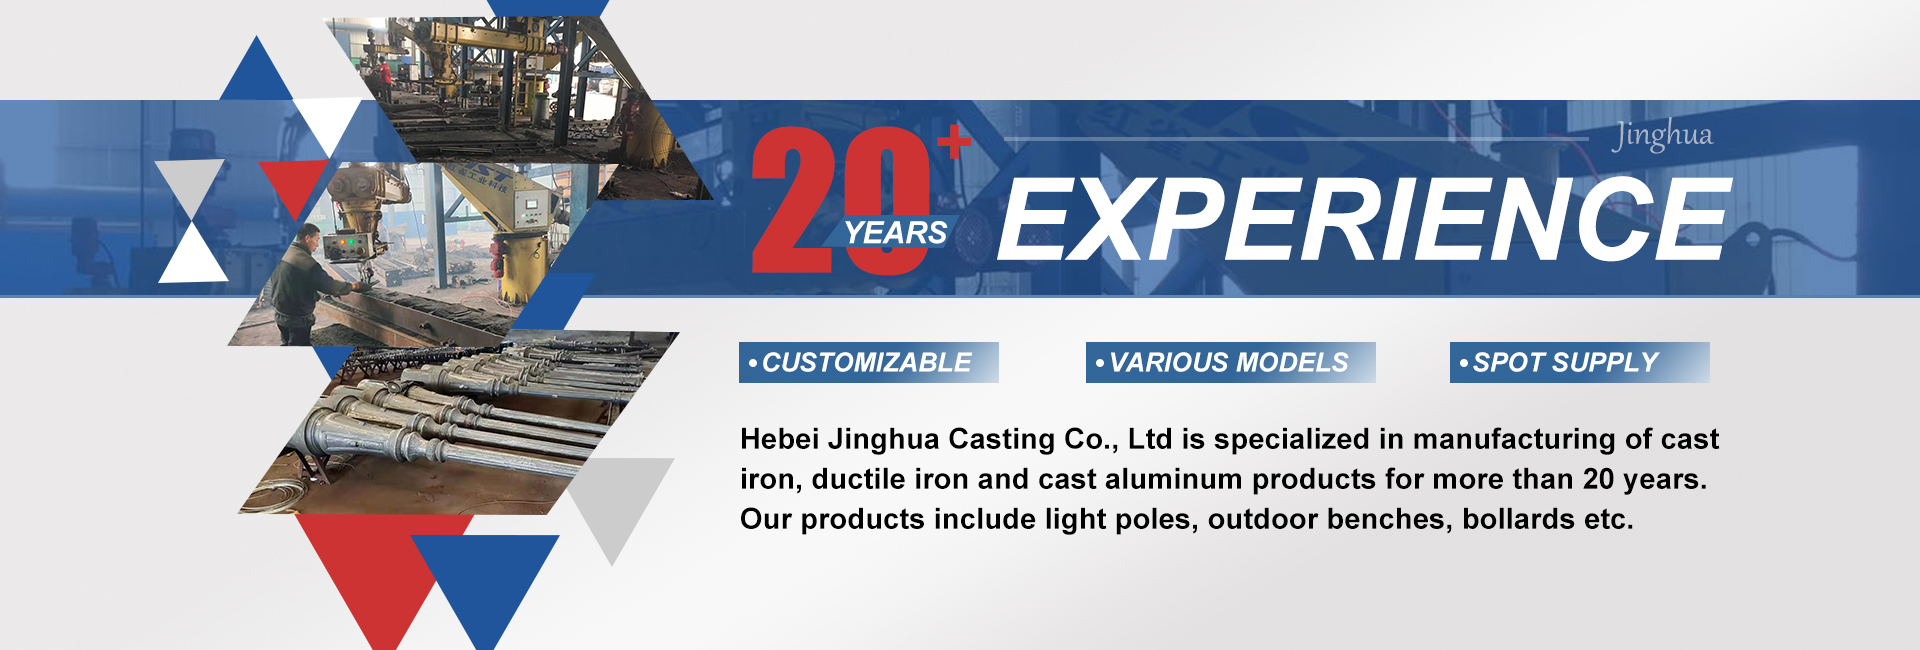 Cast iron, ductile iron and cast aluminum products